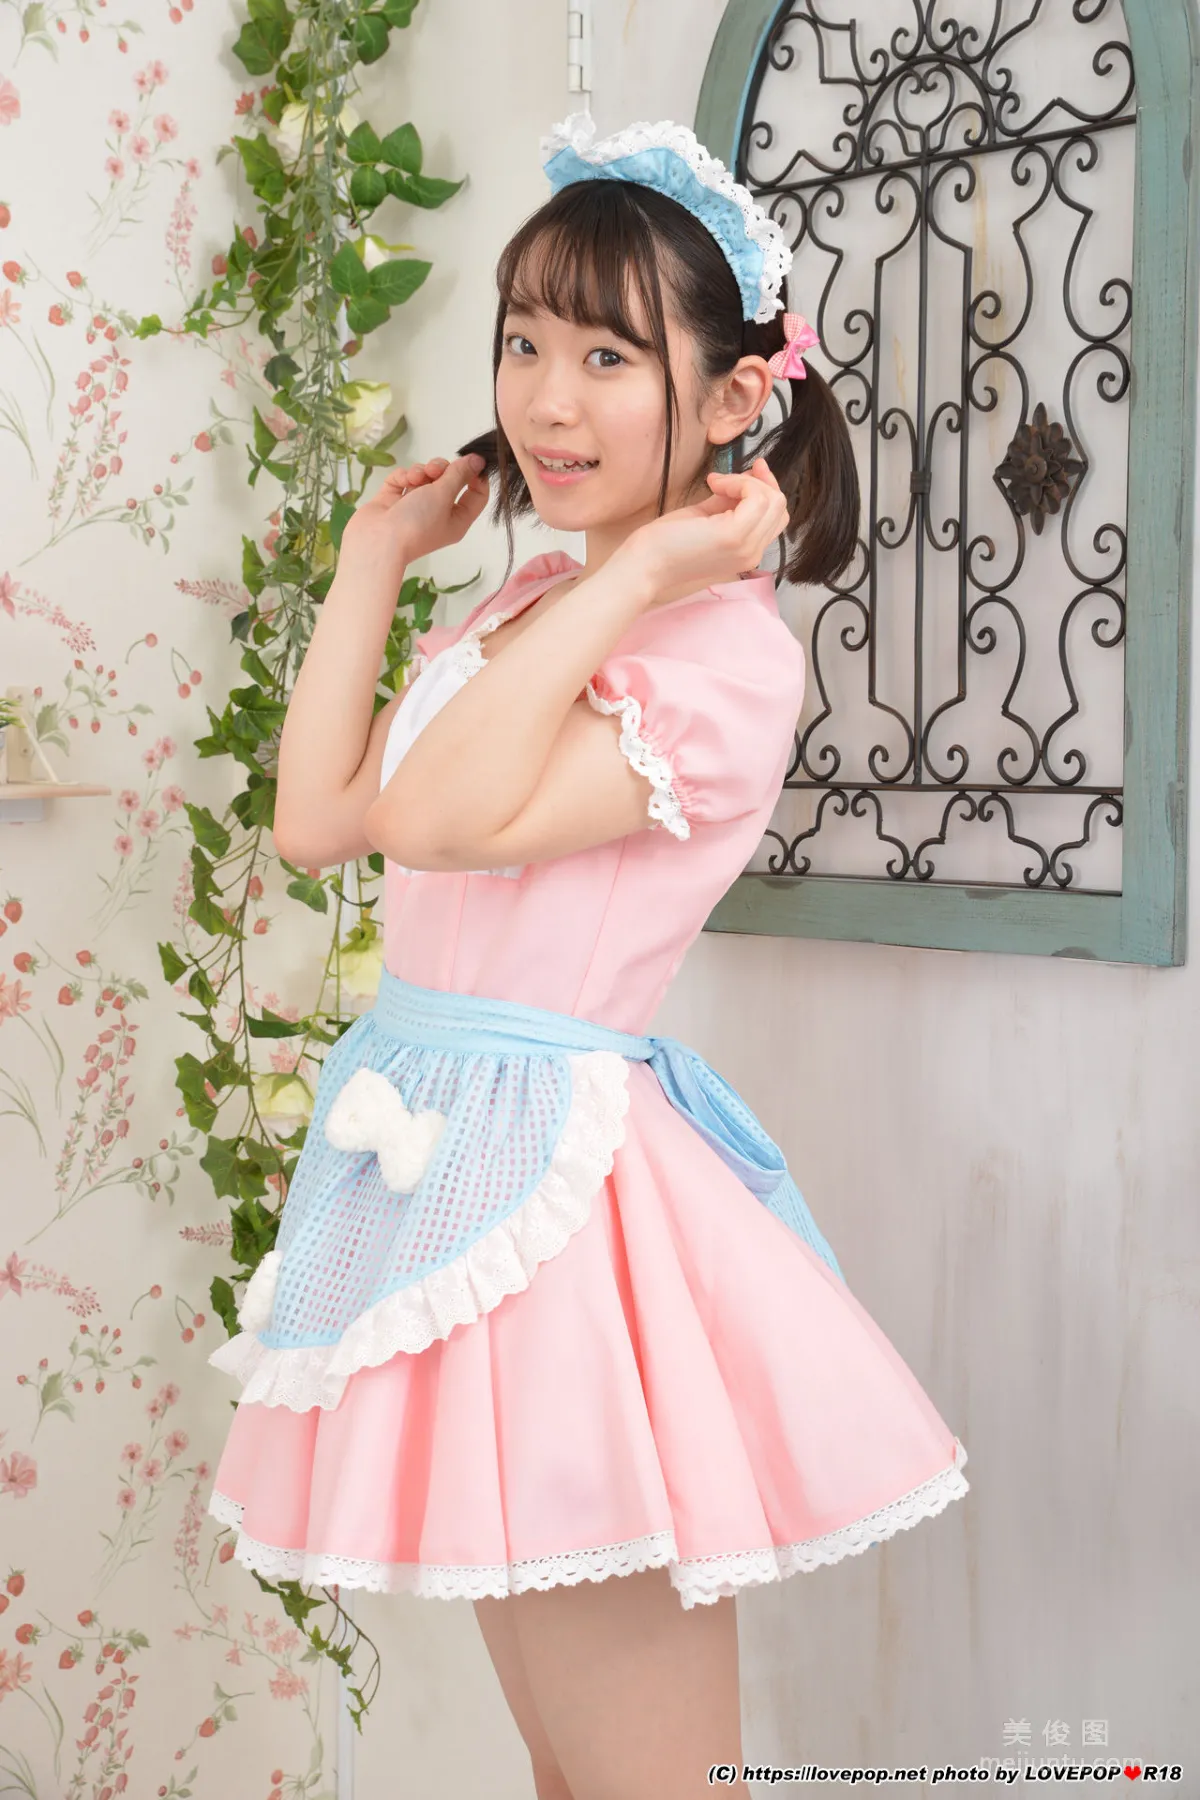 [LOVEPOP] Special Maid Collection - 架乃ゆら Photoset 045